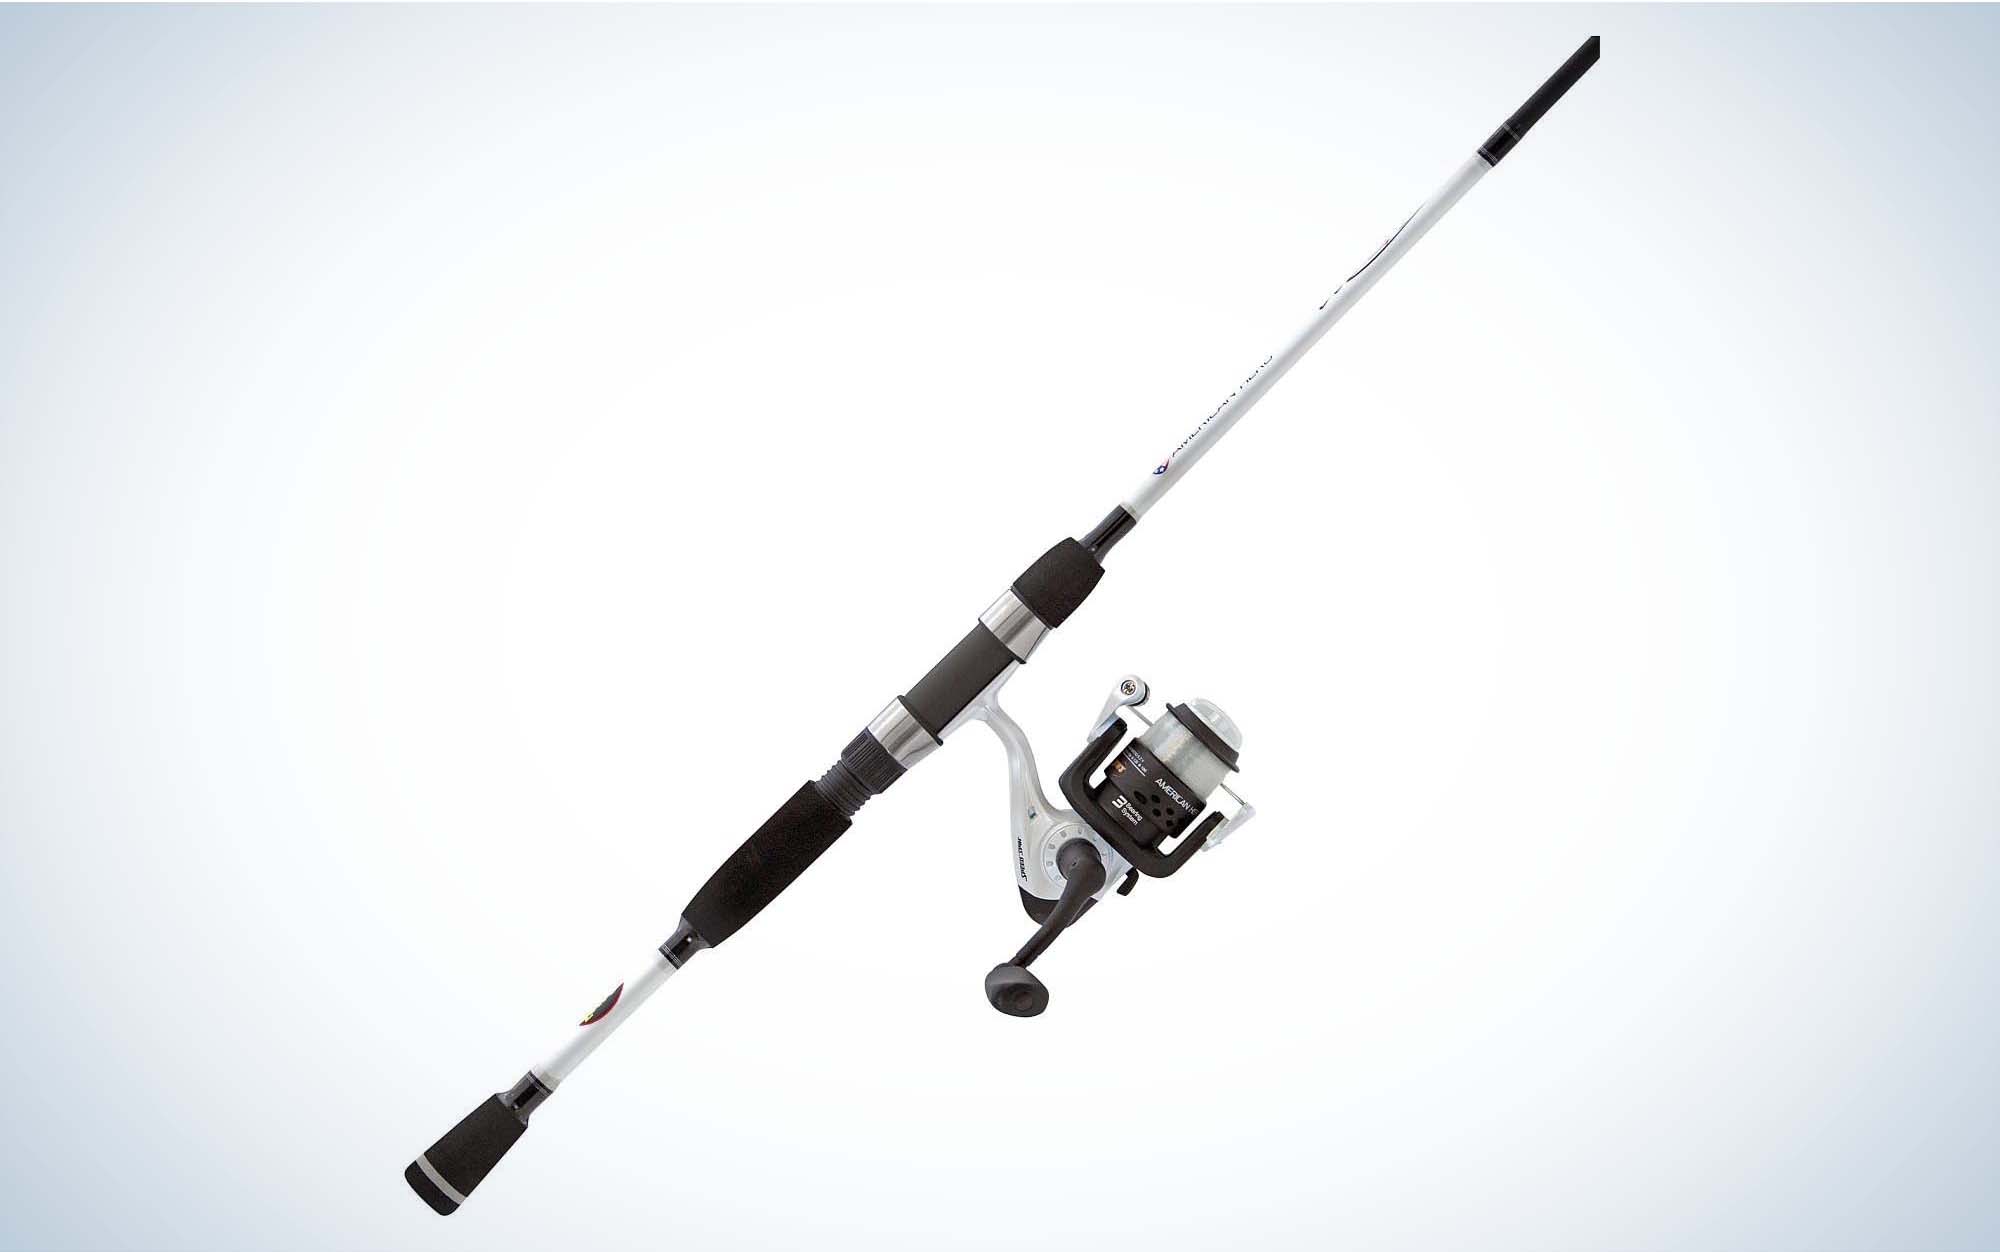 What is the best beginner all purpose fishing rod/reel combo? I